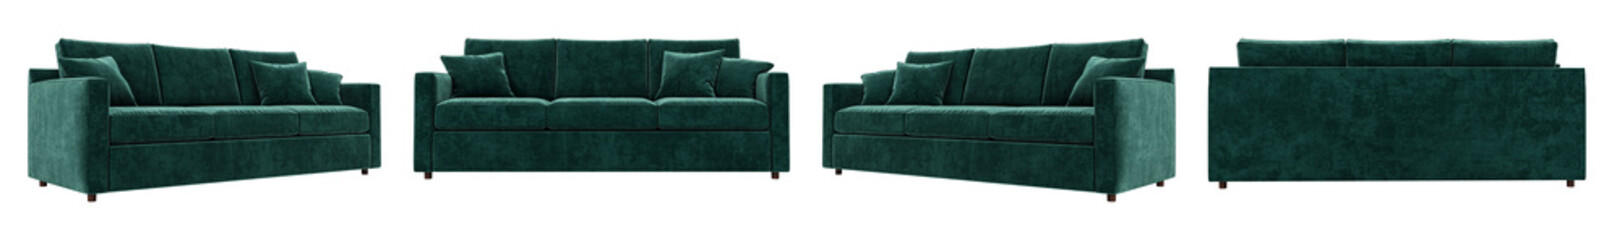 Modern and luxury green velvet sofa set isolated on white background. Furniture Collection.